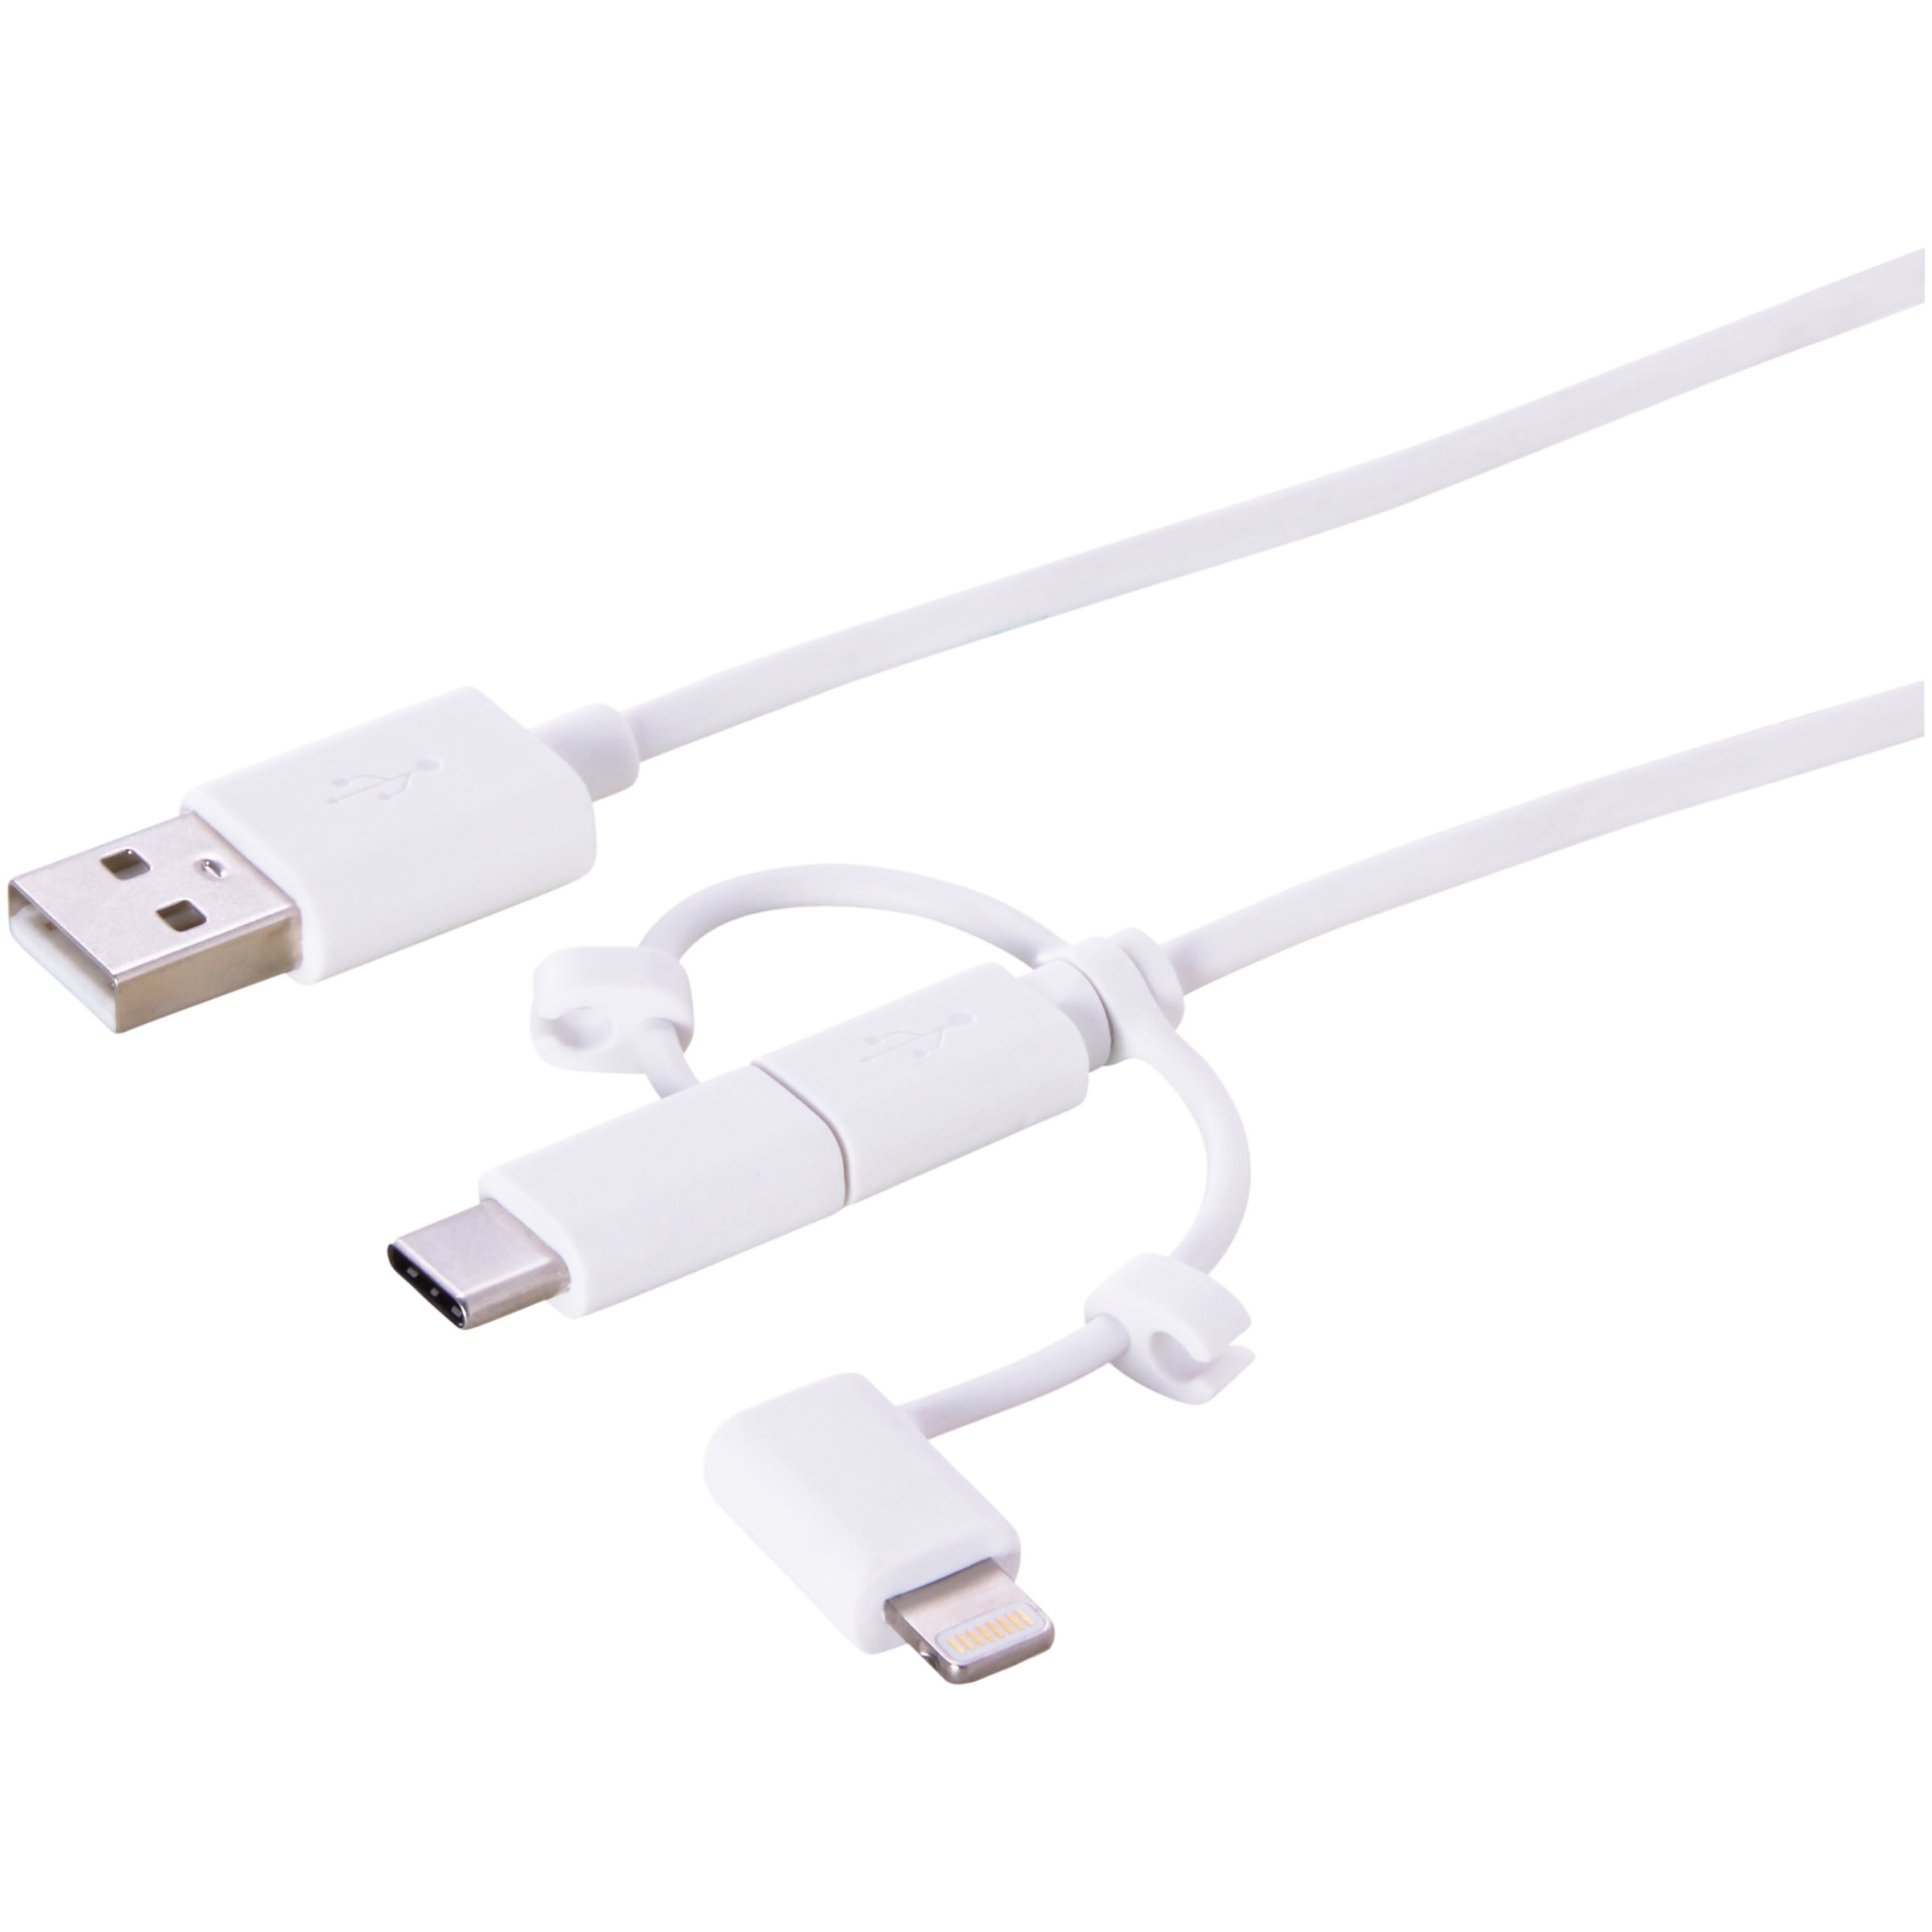 Multi Quick USB Charging Cable,Alaskan Salmon Pearl 2 in1 Fast Charger Cord Connector High Speed Durable Charging Cord Compatible with iPhone/Tablets/Samsung Galaxy/iPad and More